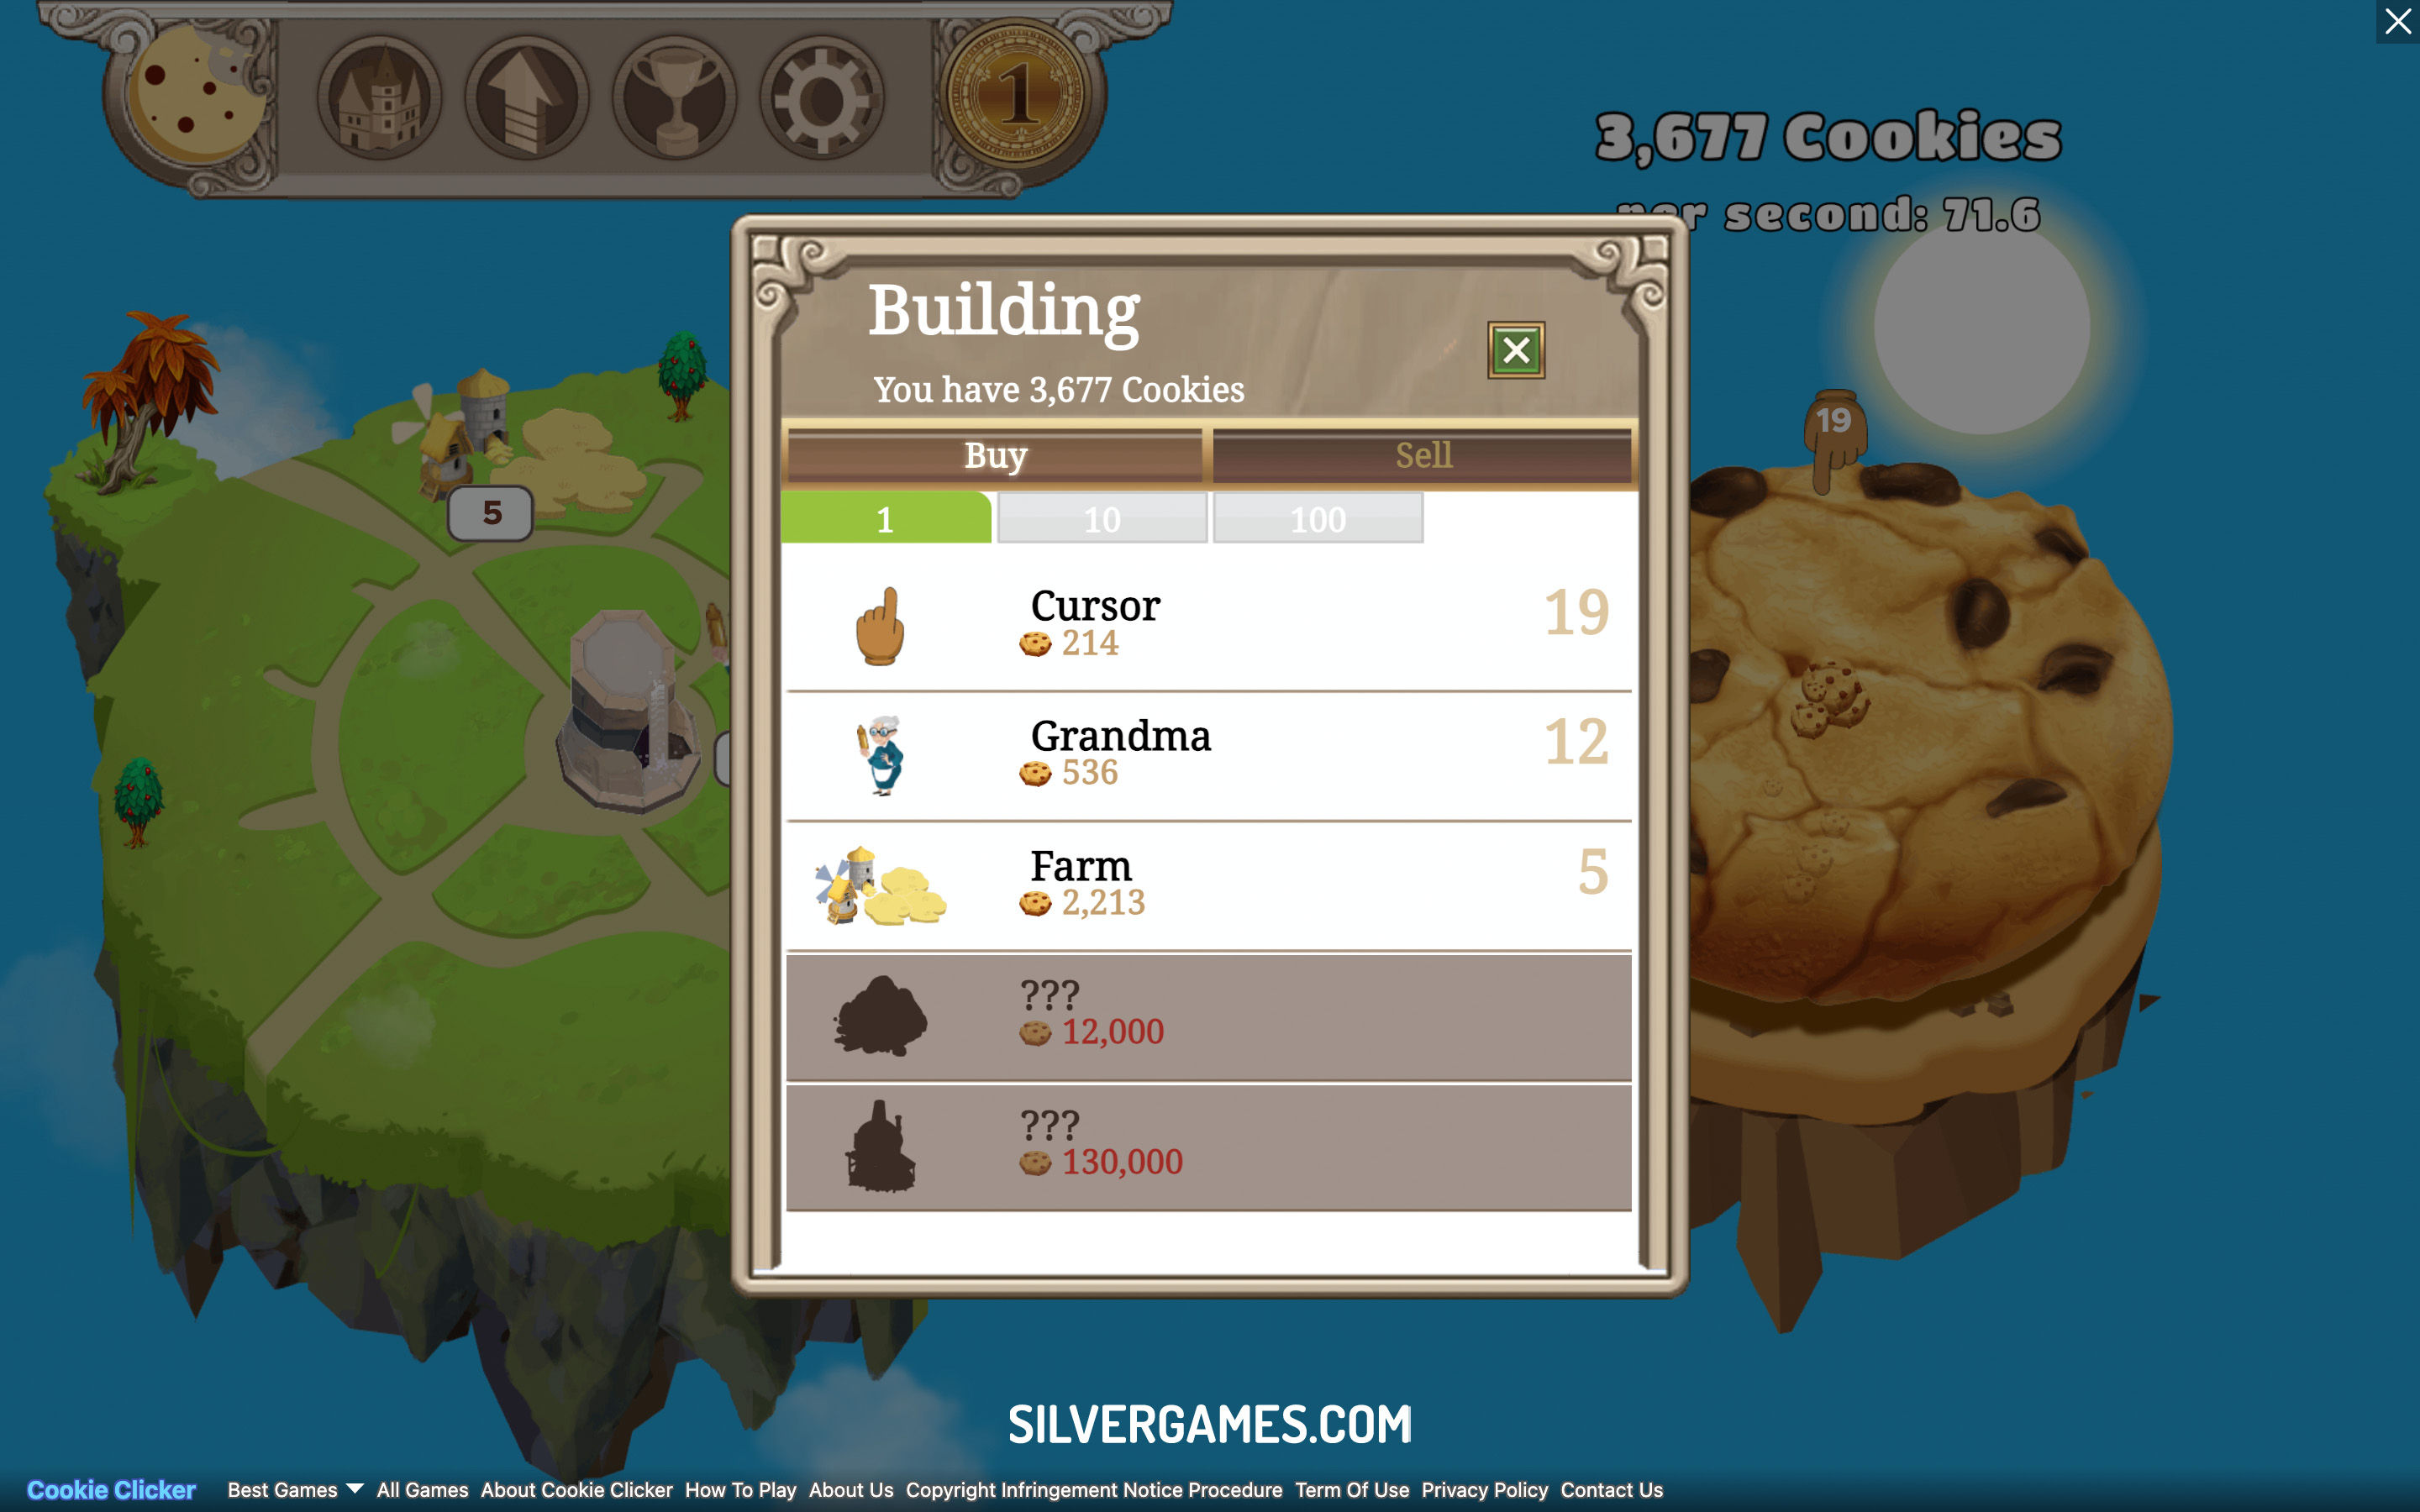 Cookie Clicker 2: The Serving Snackquel by GWDRotimi13 for